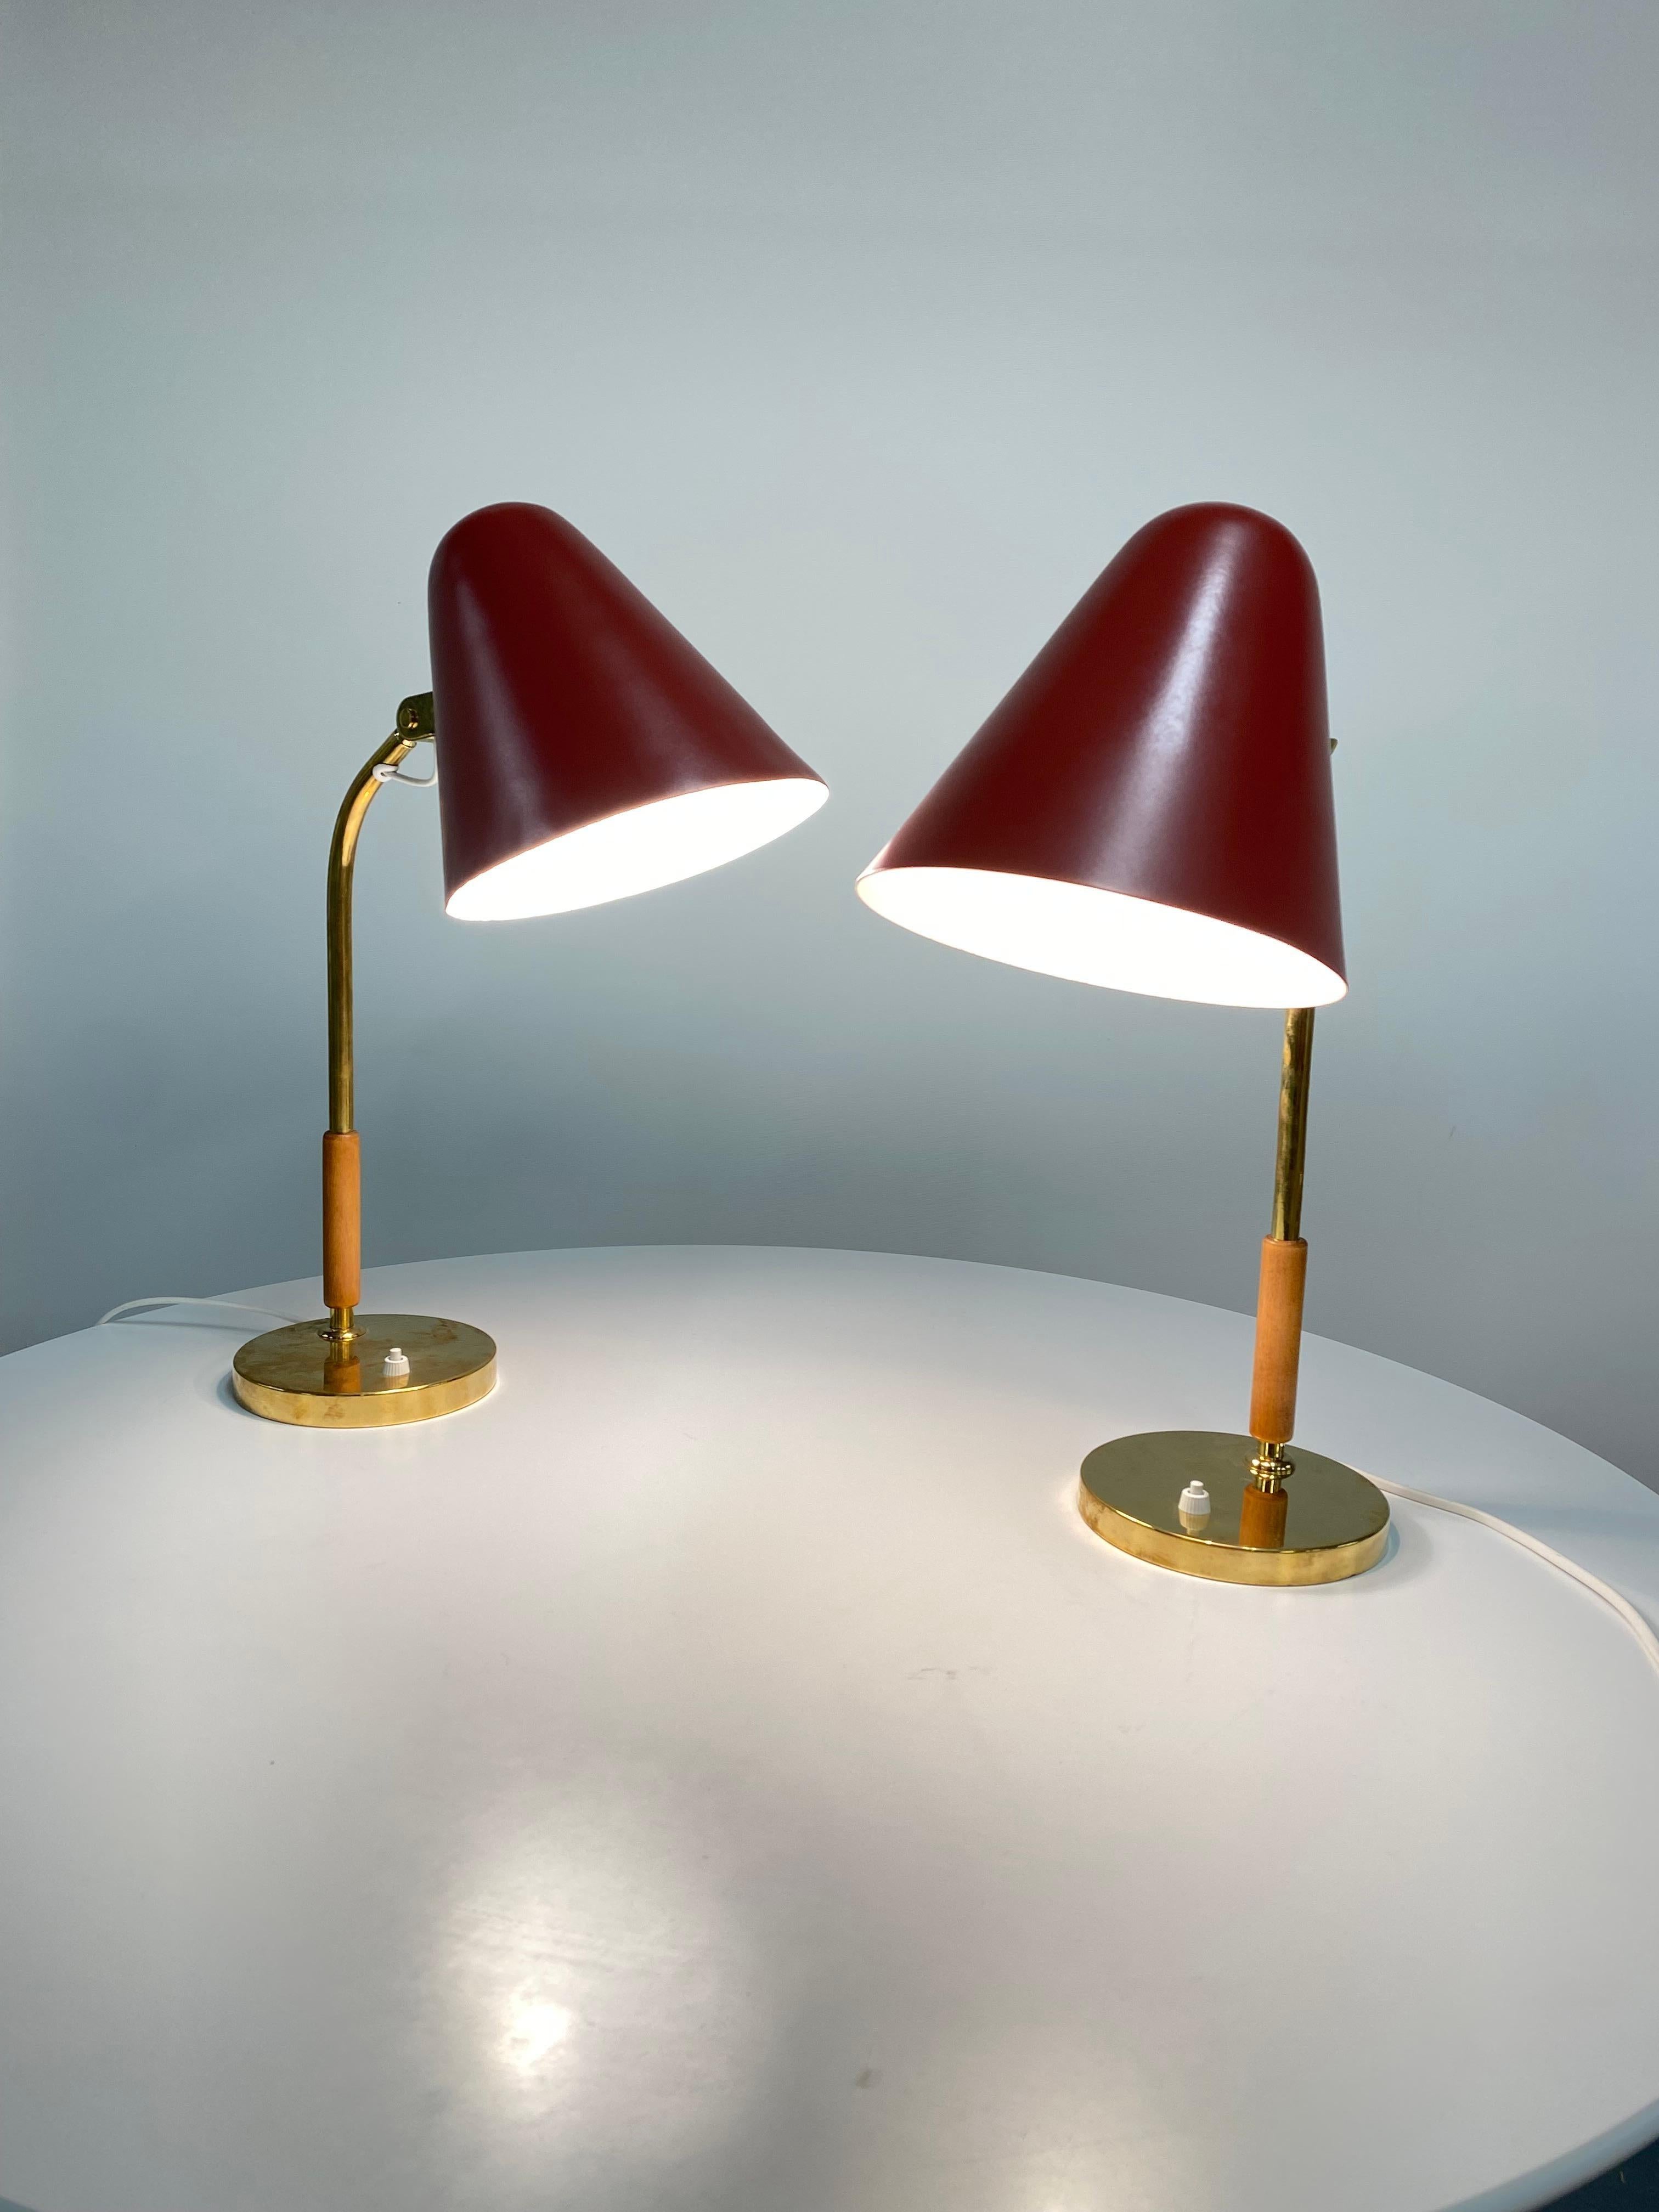 This type table lamp we haven't seen much of lately.  The red color is of a later date, but this red shade was often used in the 1950s.

Of course these can be used in private residences as well as offices. Colored Tynell versions have been rising